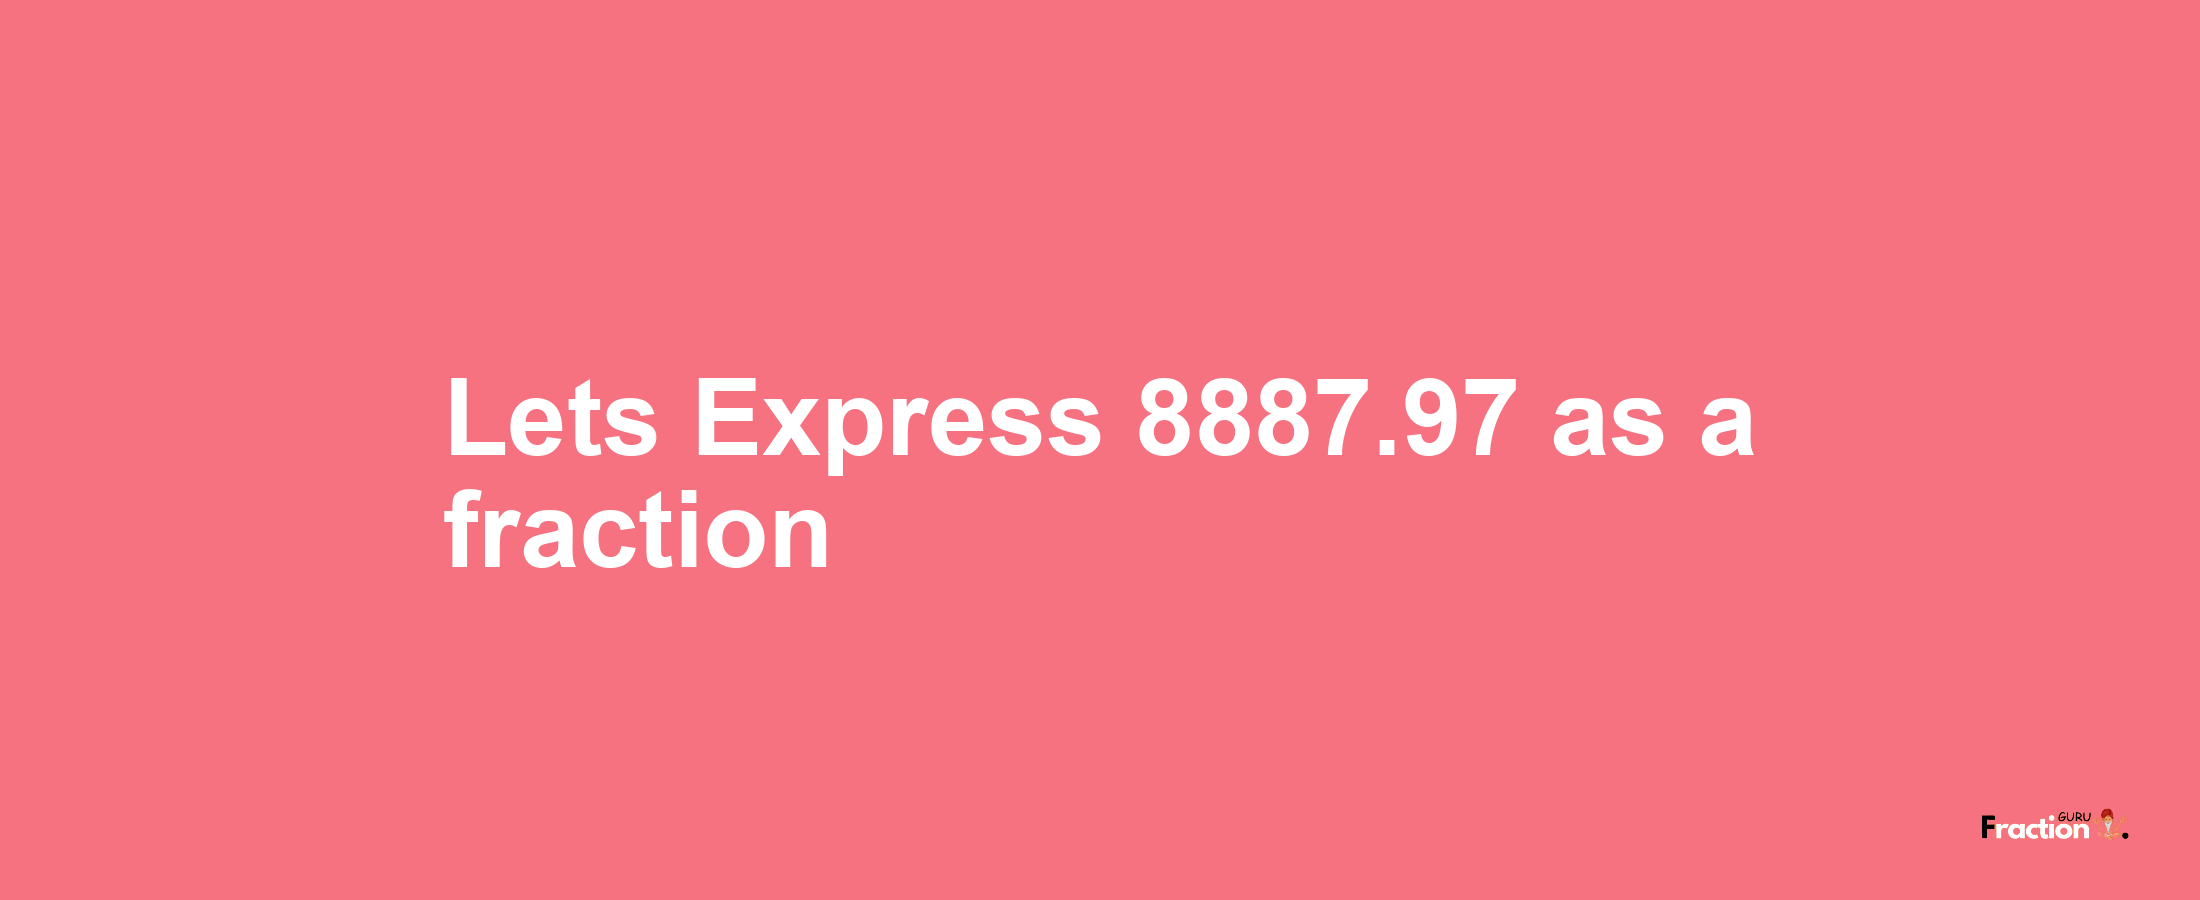 Lets Express 8887.97 as afraction